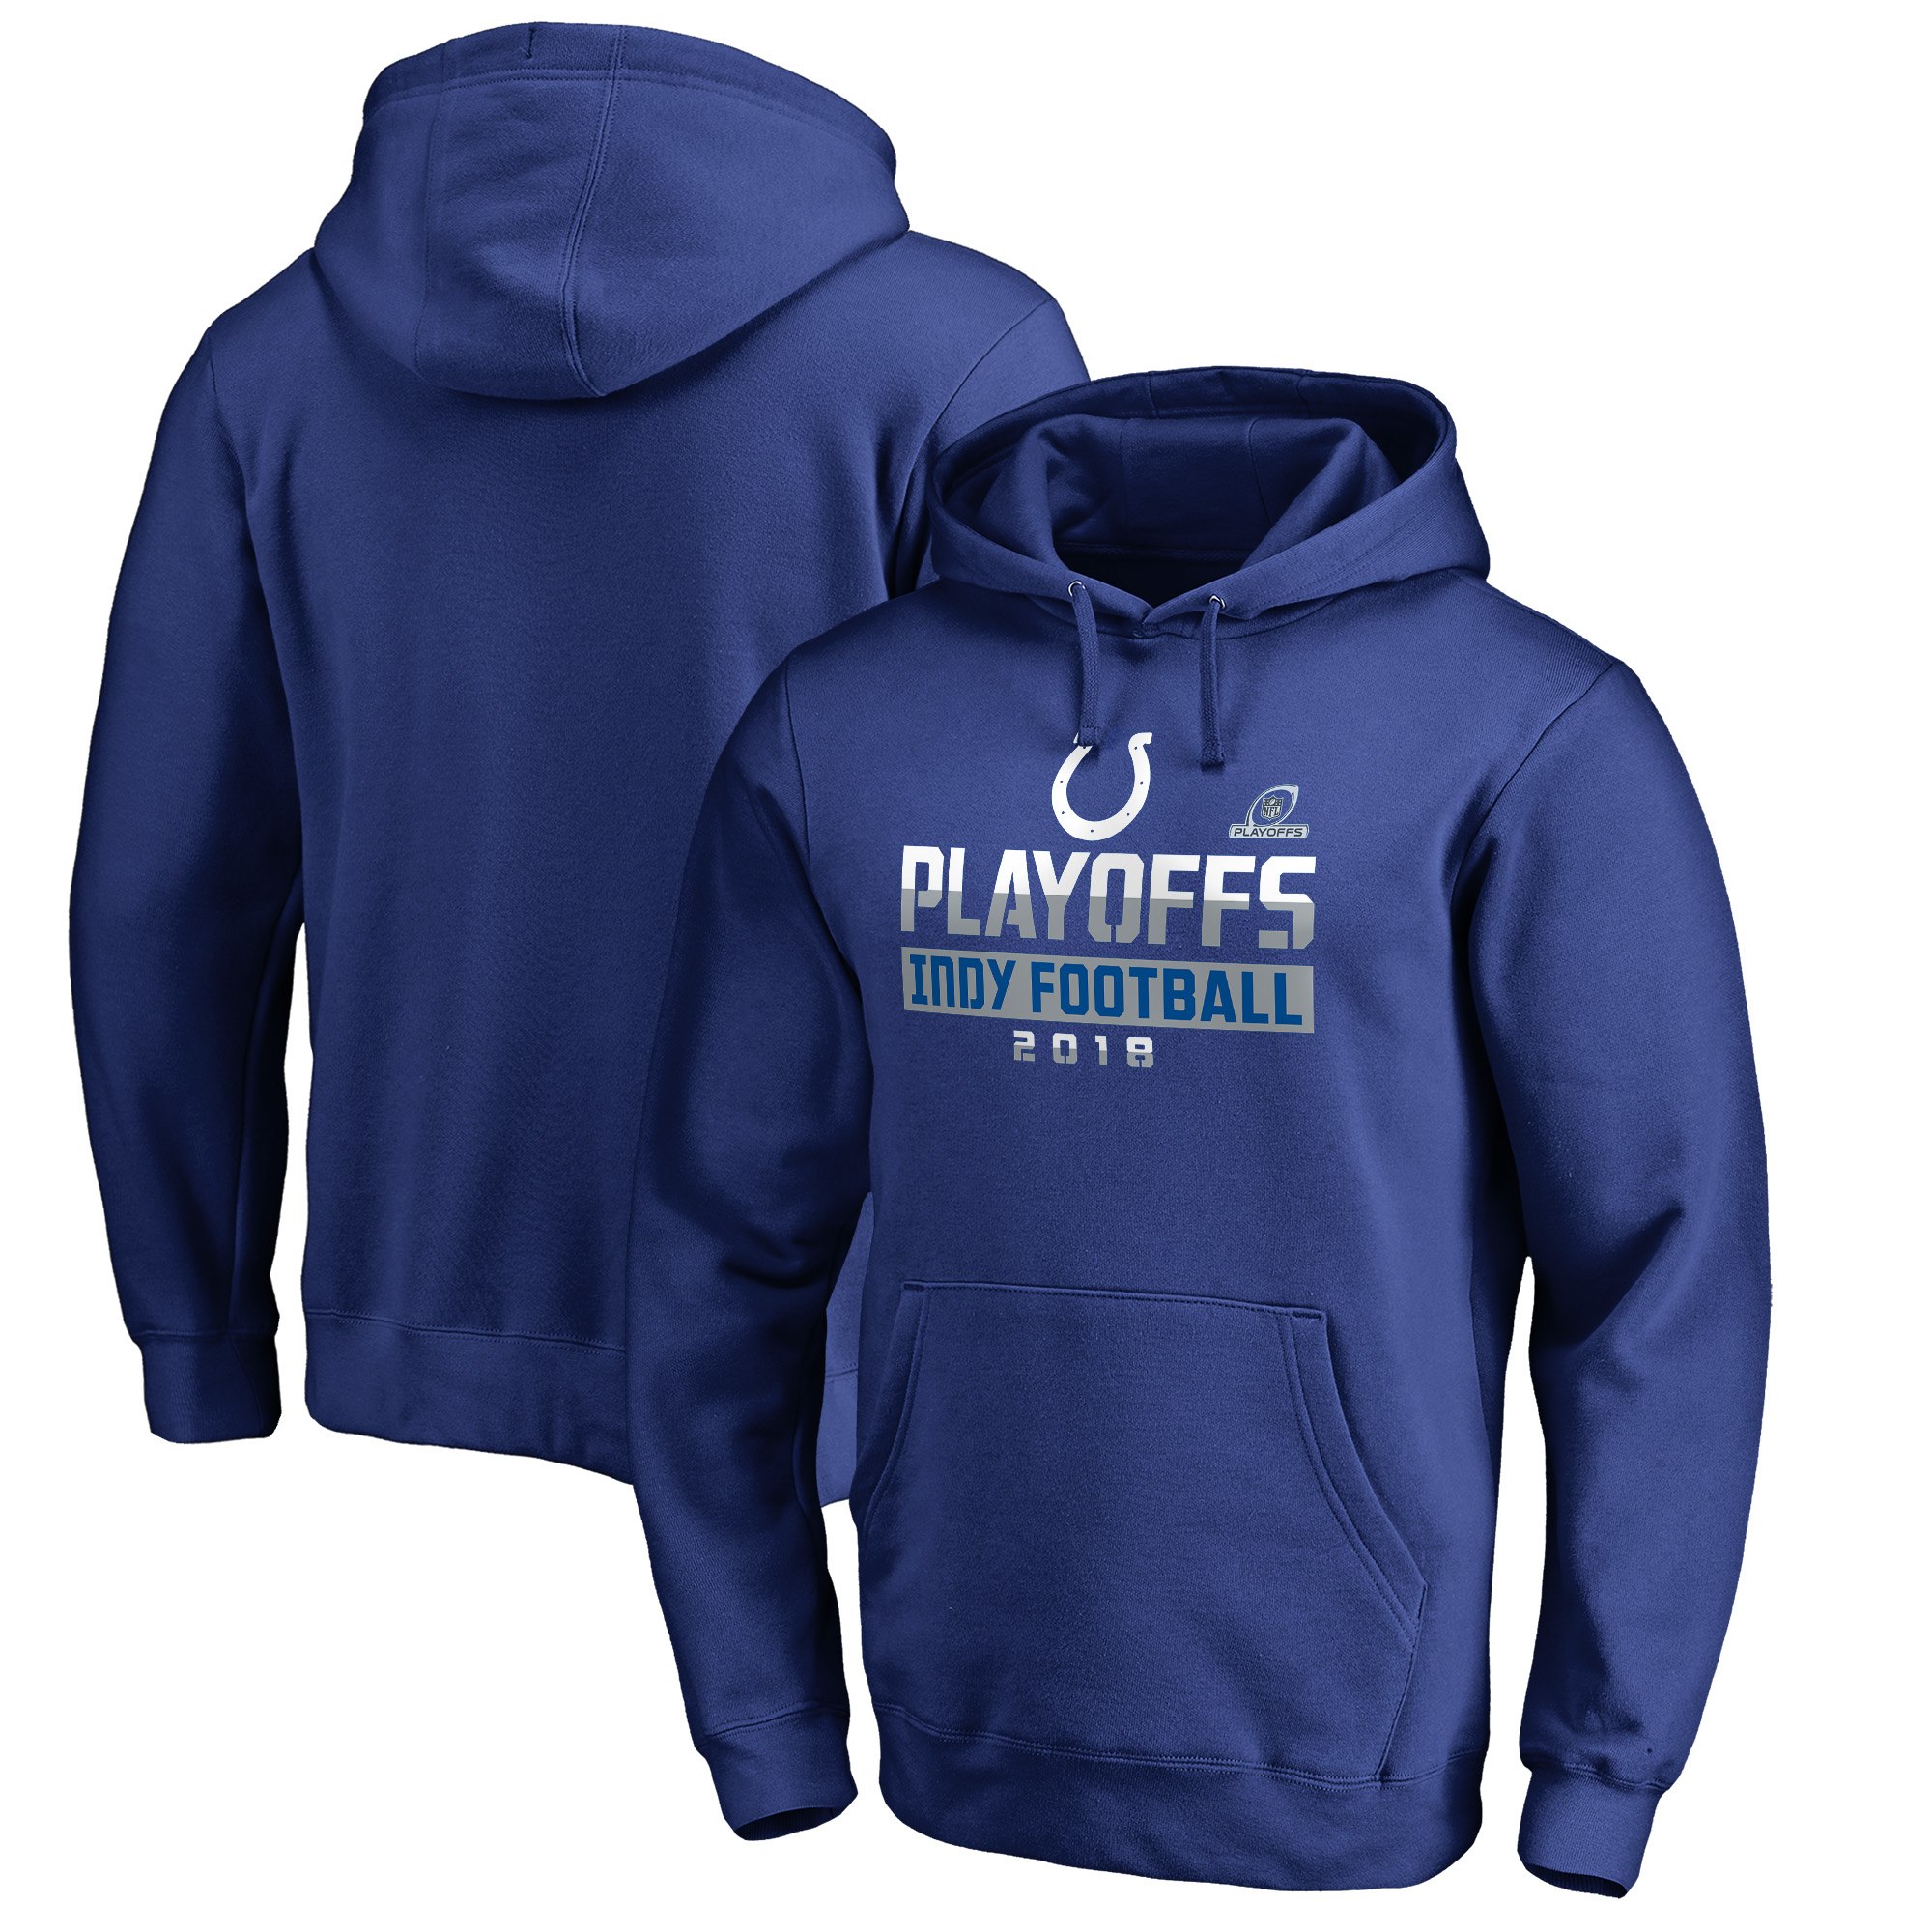 Colts Blue 2018 NFL Playoffs Indy Football Men's Pullover Hoodie